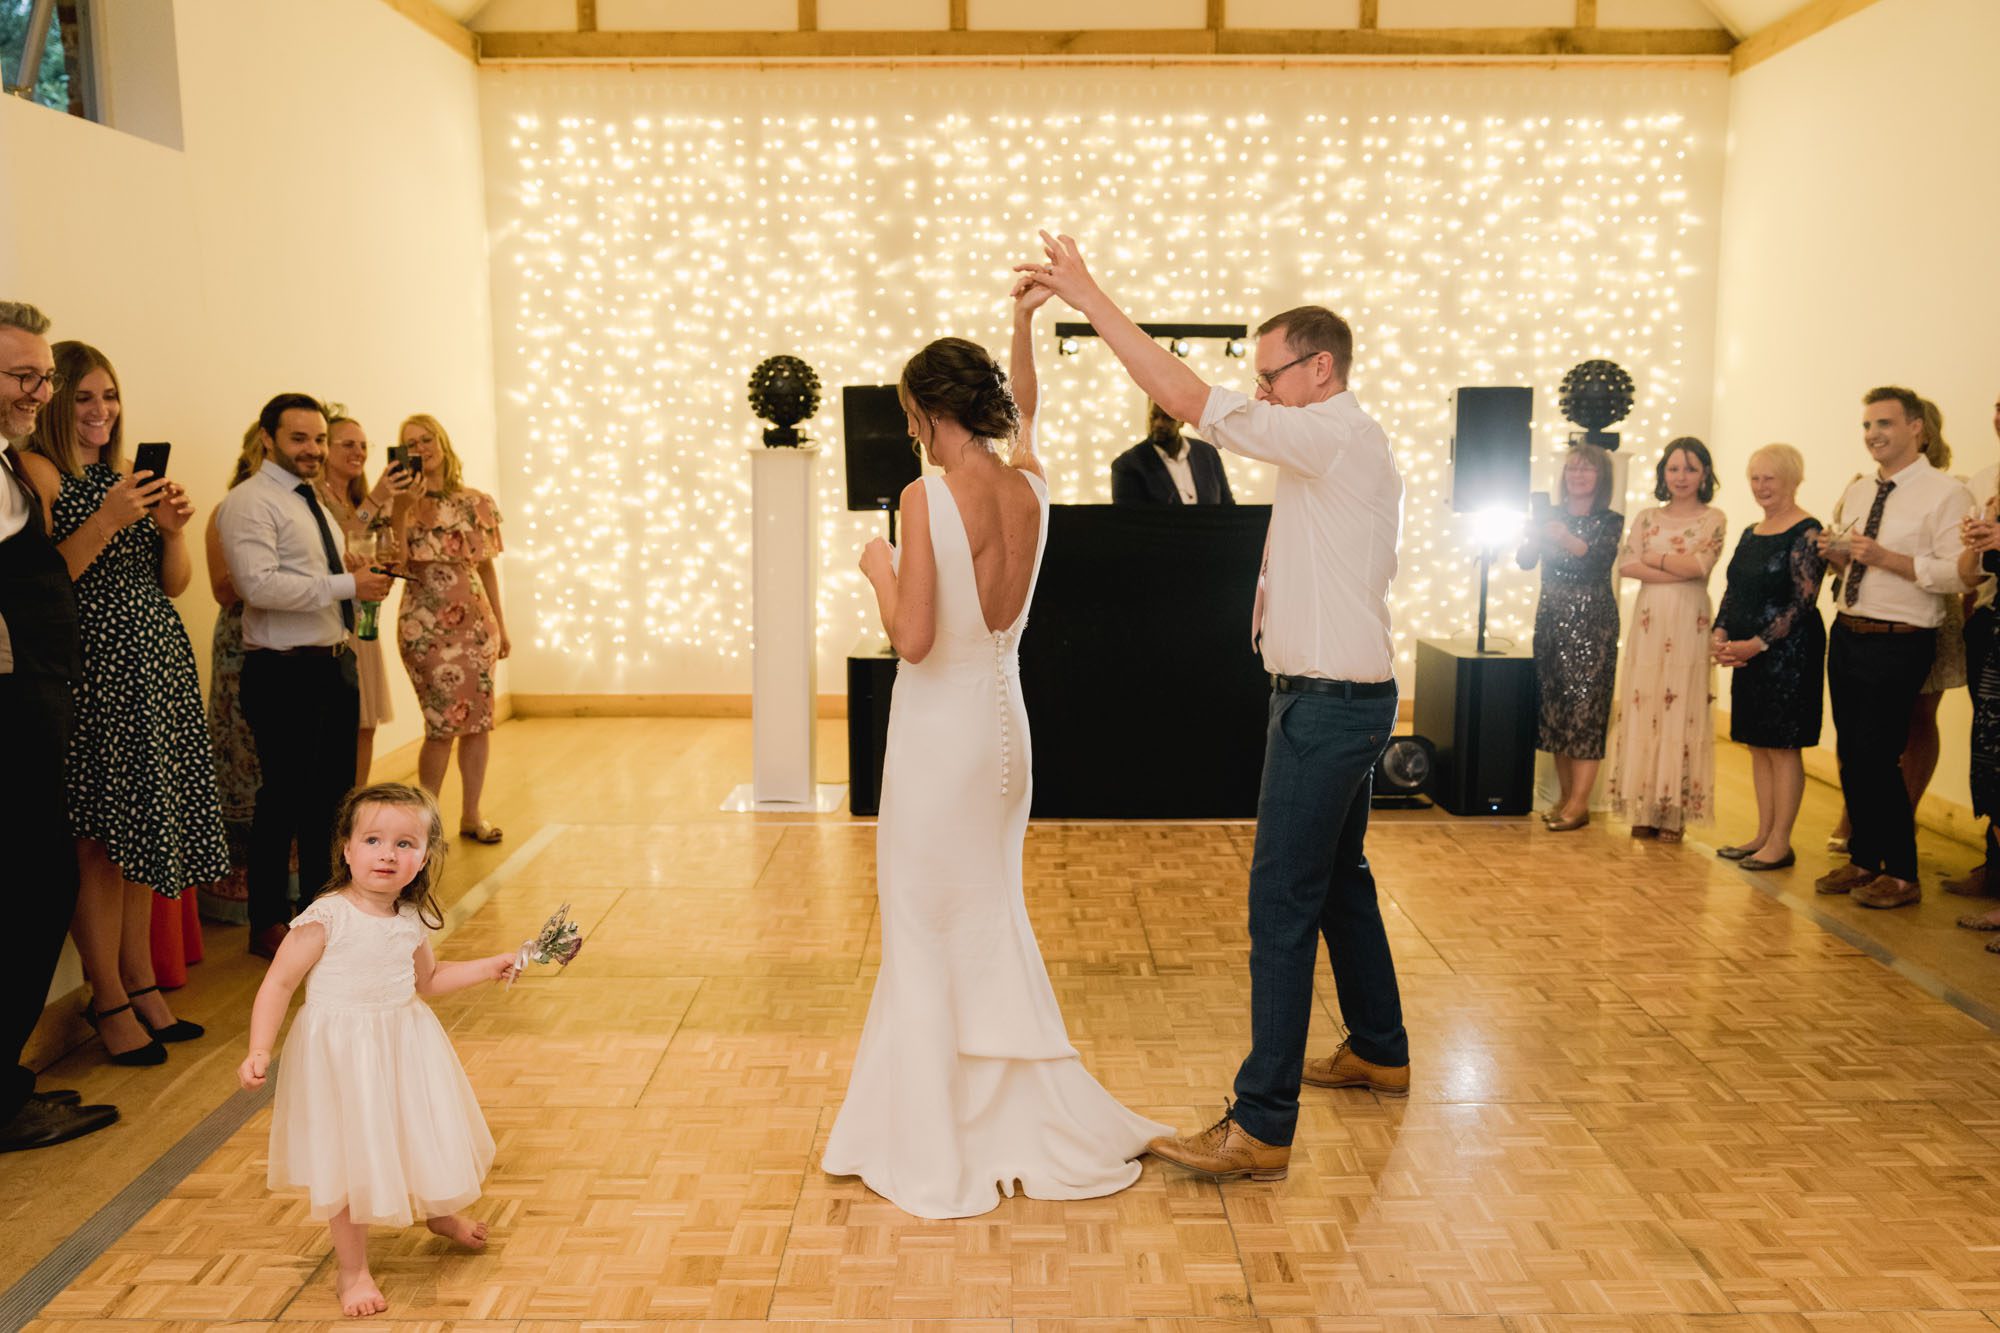 A bride and groom have their first dance on the dancefloor as their guests watch at Dorney Court in Buckinghamshire.